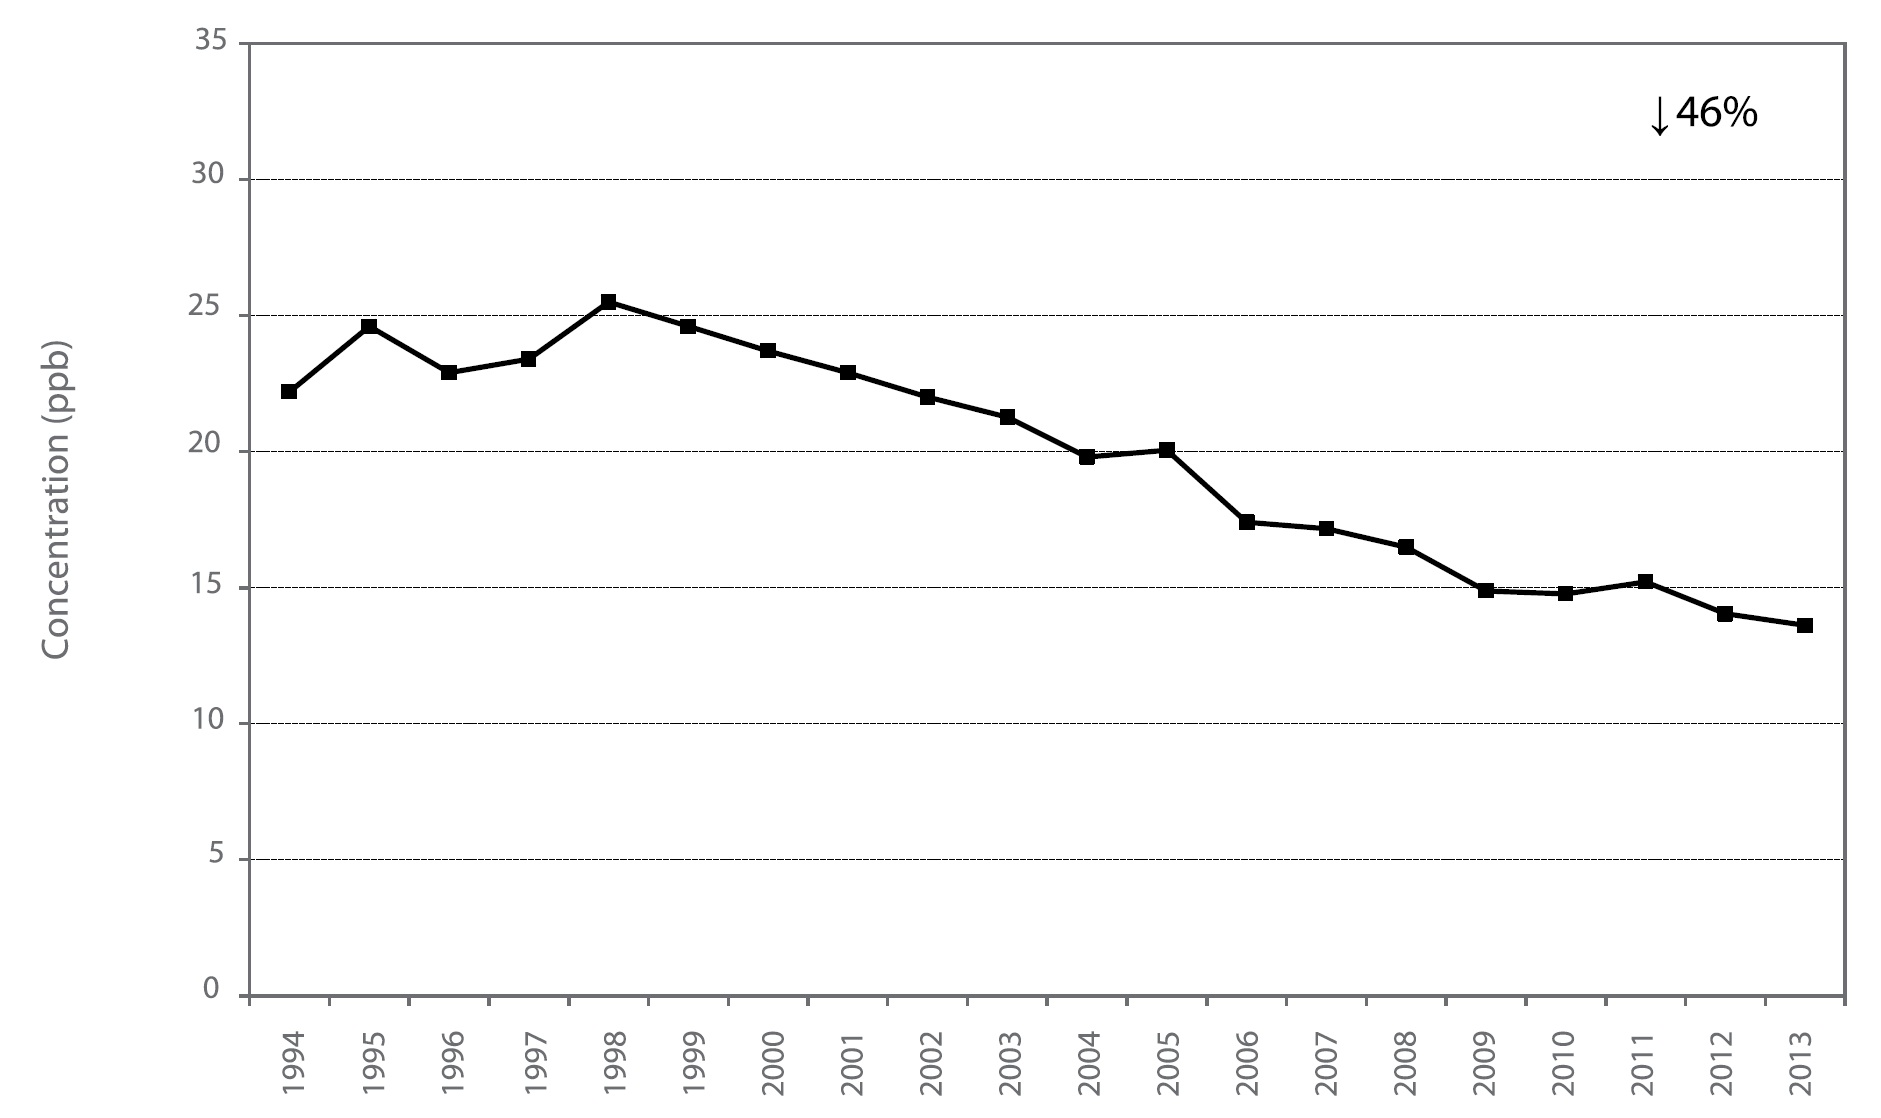 Figure A35 is a line chart displaying the nitrogen dioxide annual mean at Toronto East from 1994 to 2013. Over this 20-year period, nitrogen dioxide decreased 46%.